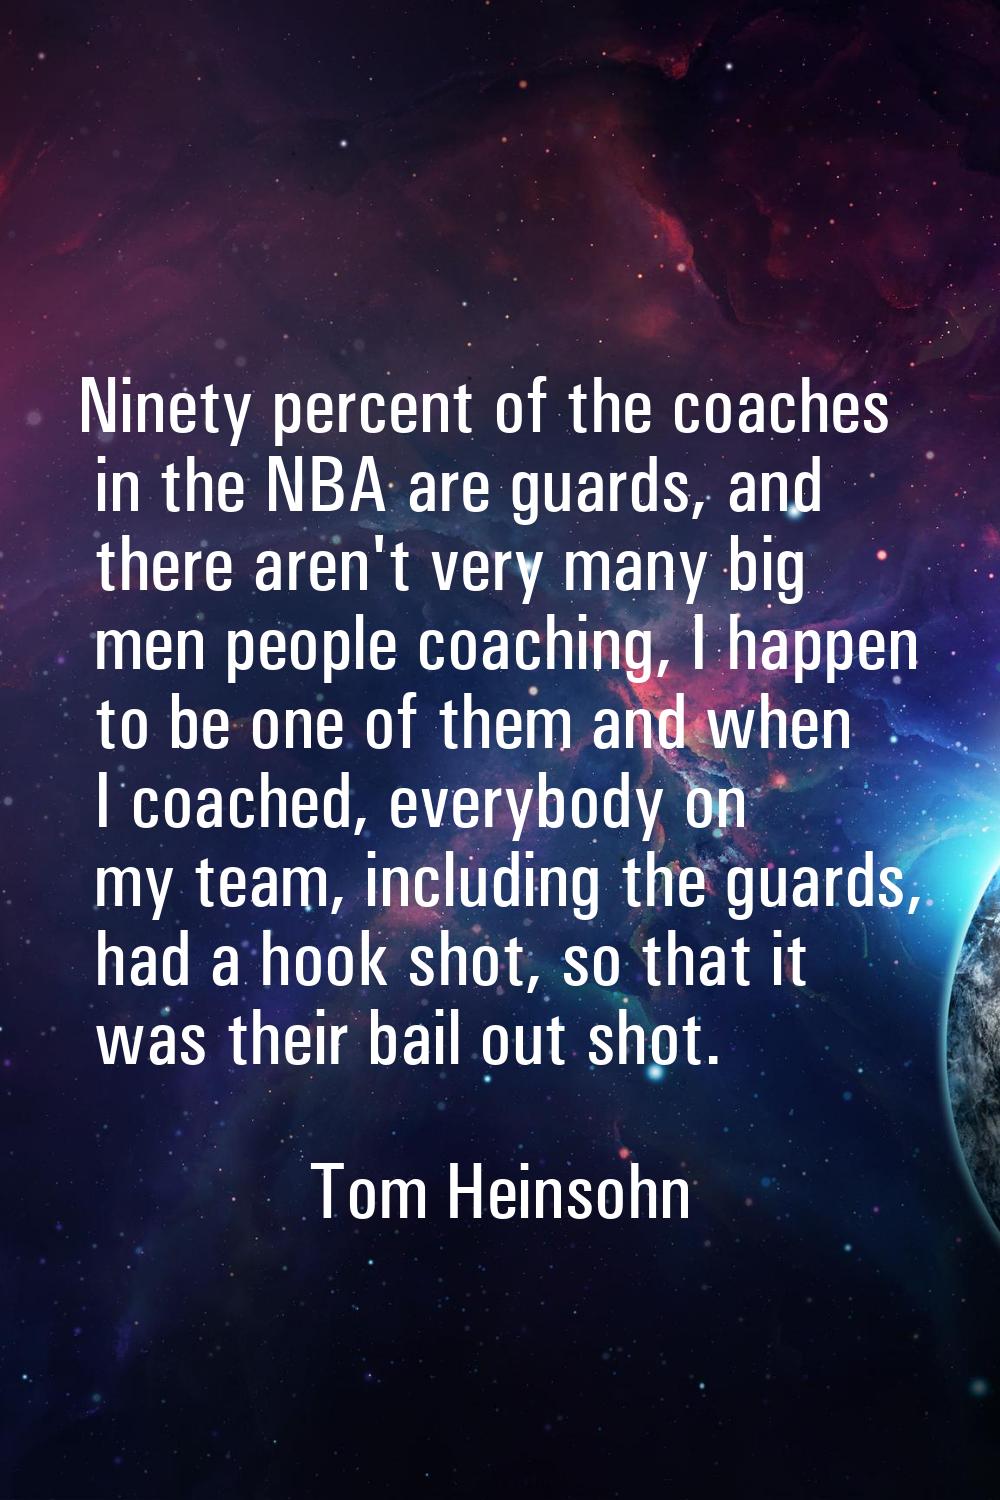 Ninety percent of the coaches in the NBA are guards, and there aren't very many big men people coac